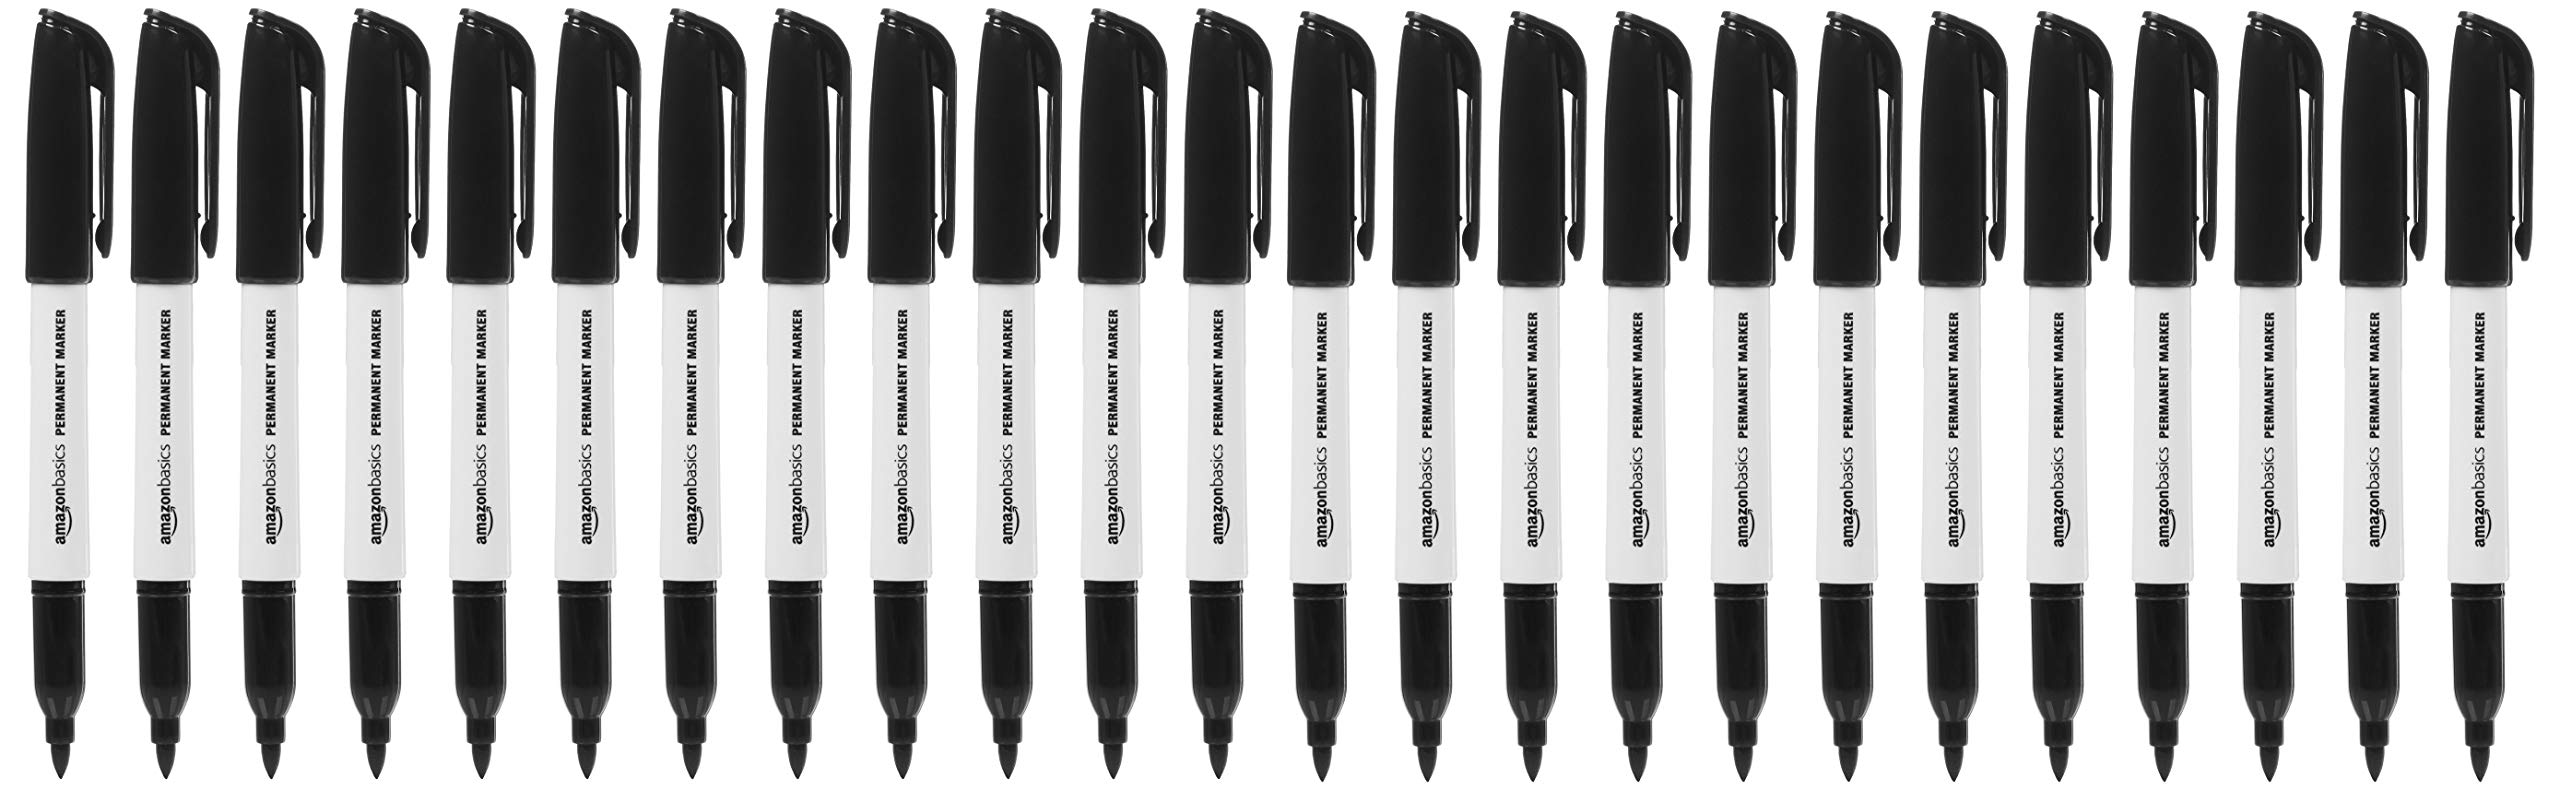 Book Cover Amazon Basics Fine Point Tip Permanent Markers, Black, 24-Pack Black 1 Count (Pack of 24) Markers